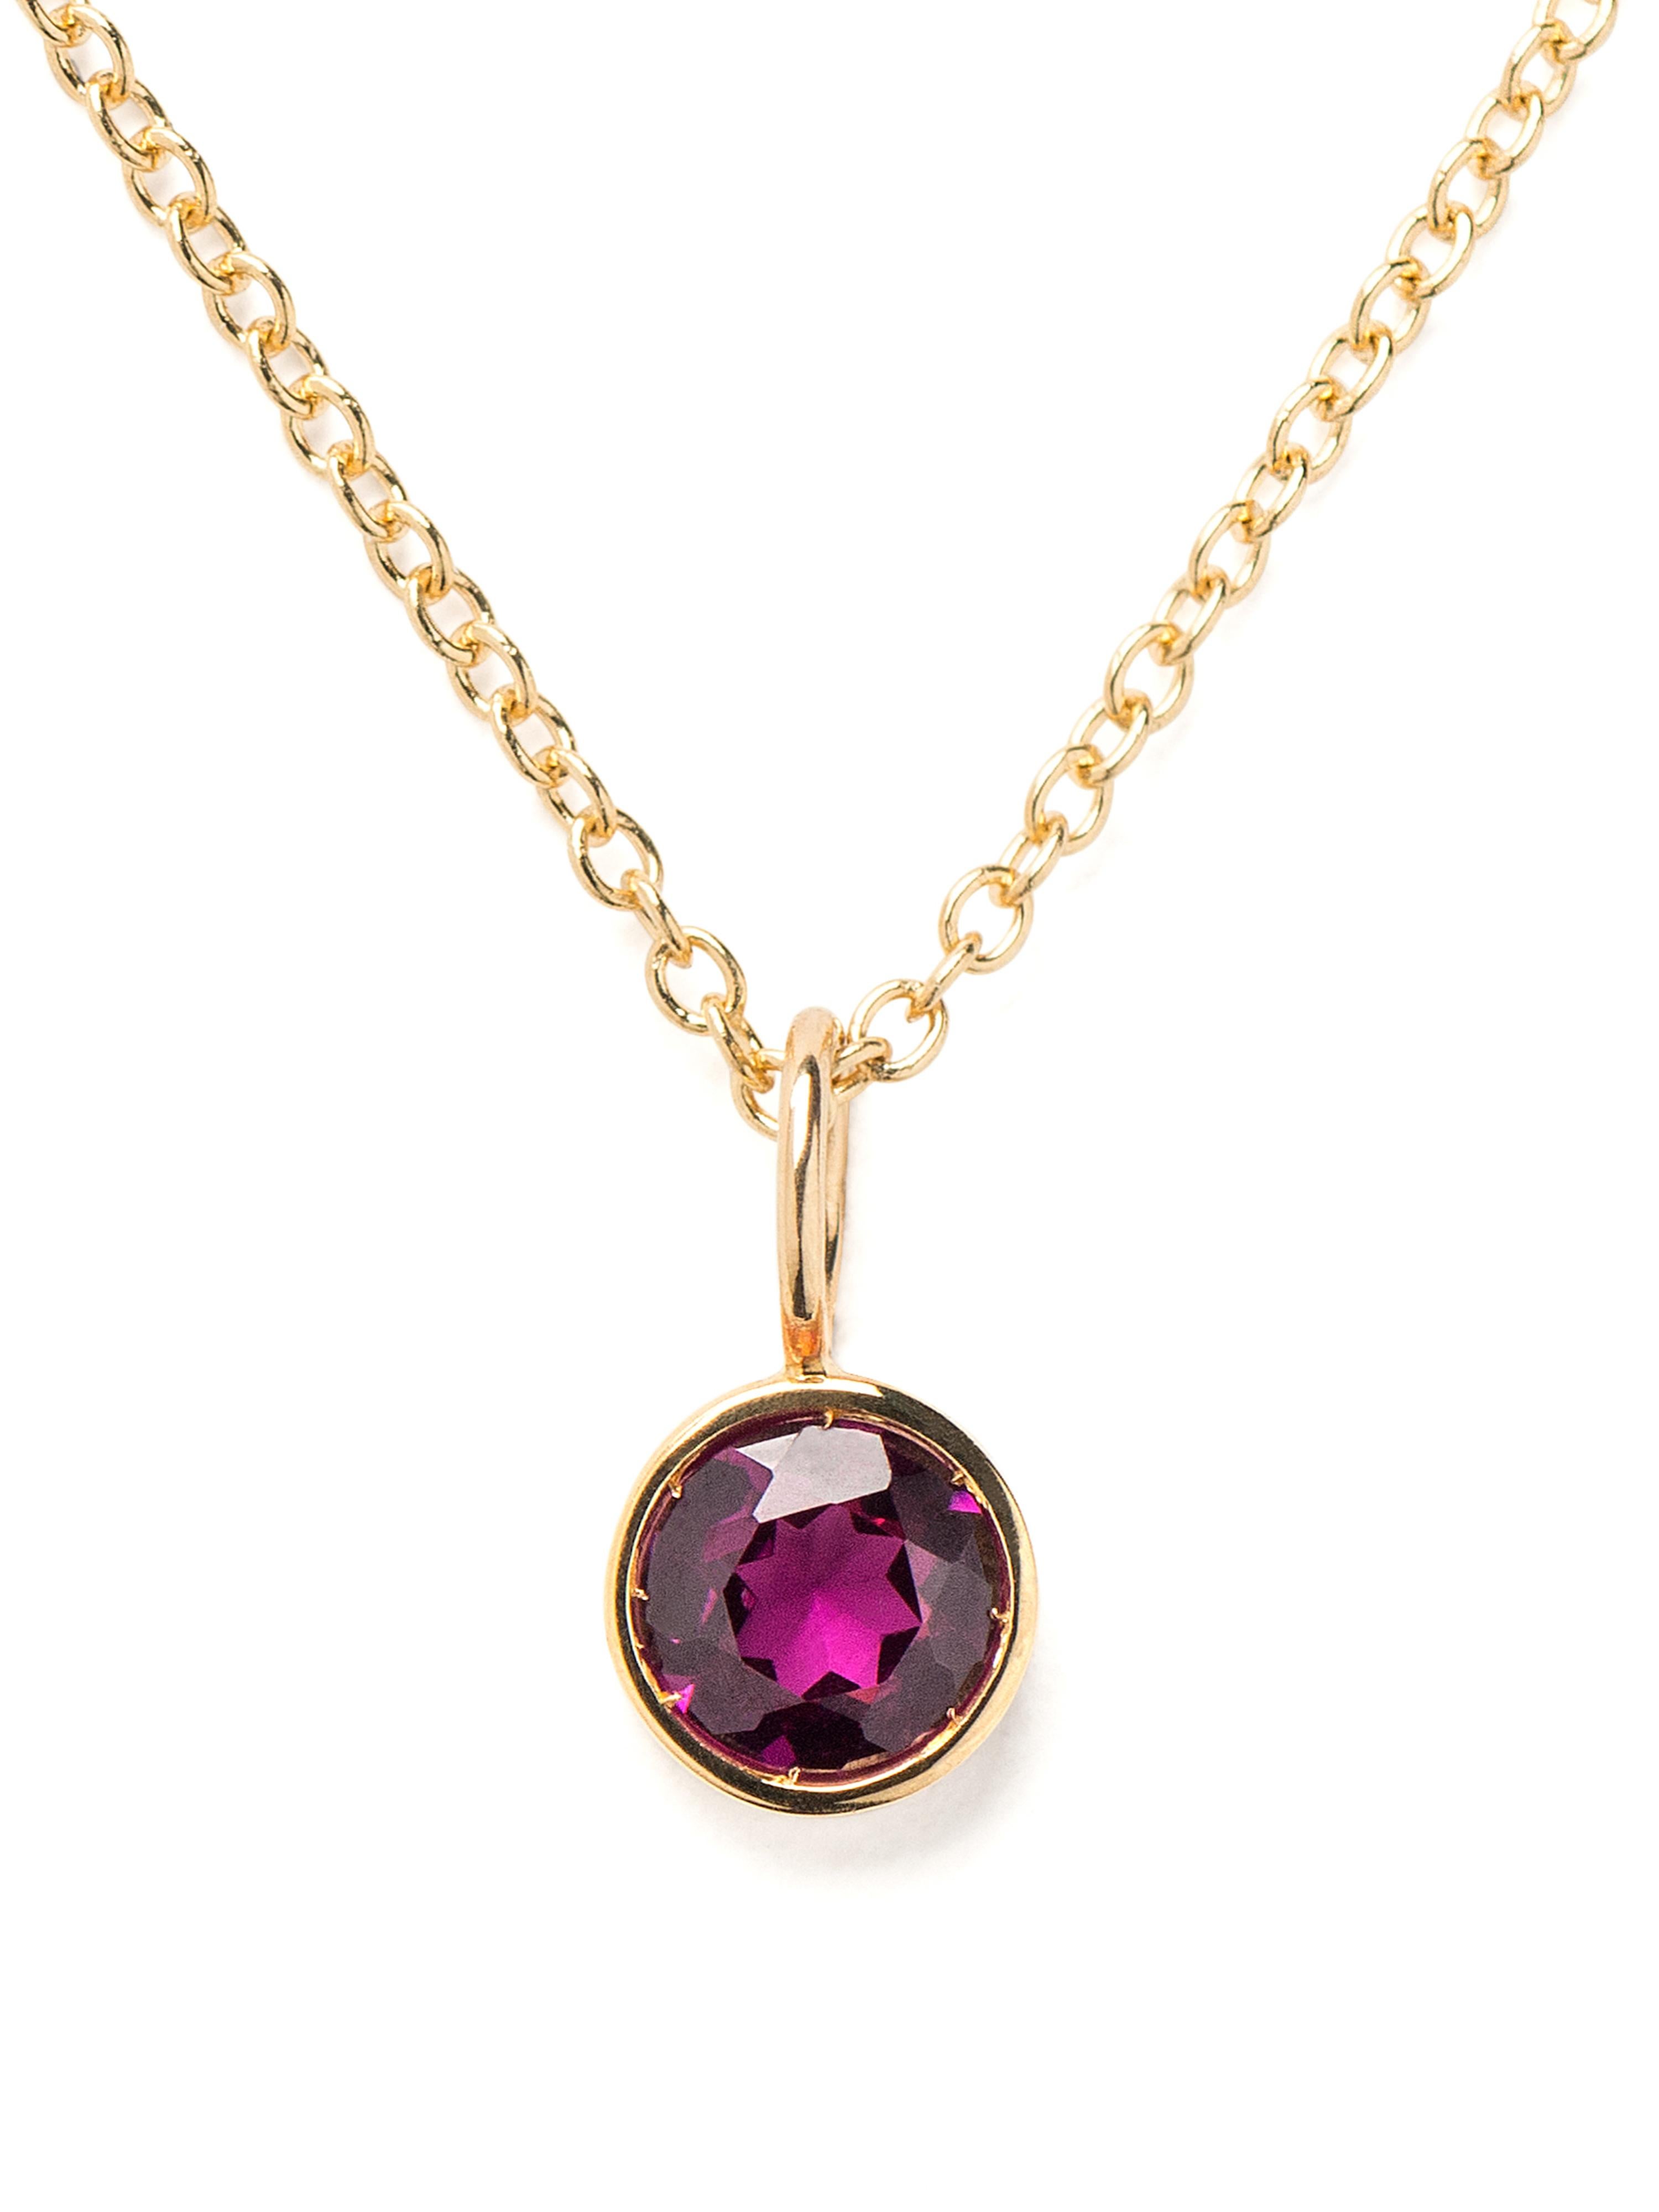 Adorned with fine stones, the Lolita collection, inspired by the godron motif dear to the House of Poiray, maliciously advocates the art of accumulation.

Size of the pattern: 6.5x6.5 mm
Stone: rhodolite - 0.6 carat
Shape: round
Weight of gold : 0.3